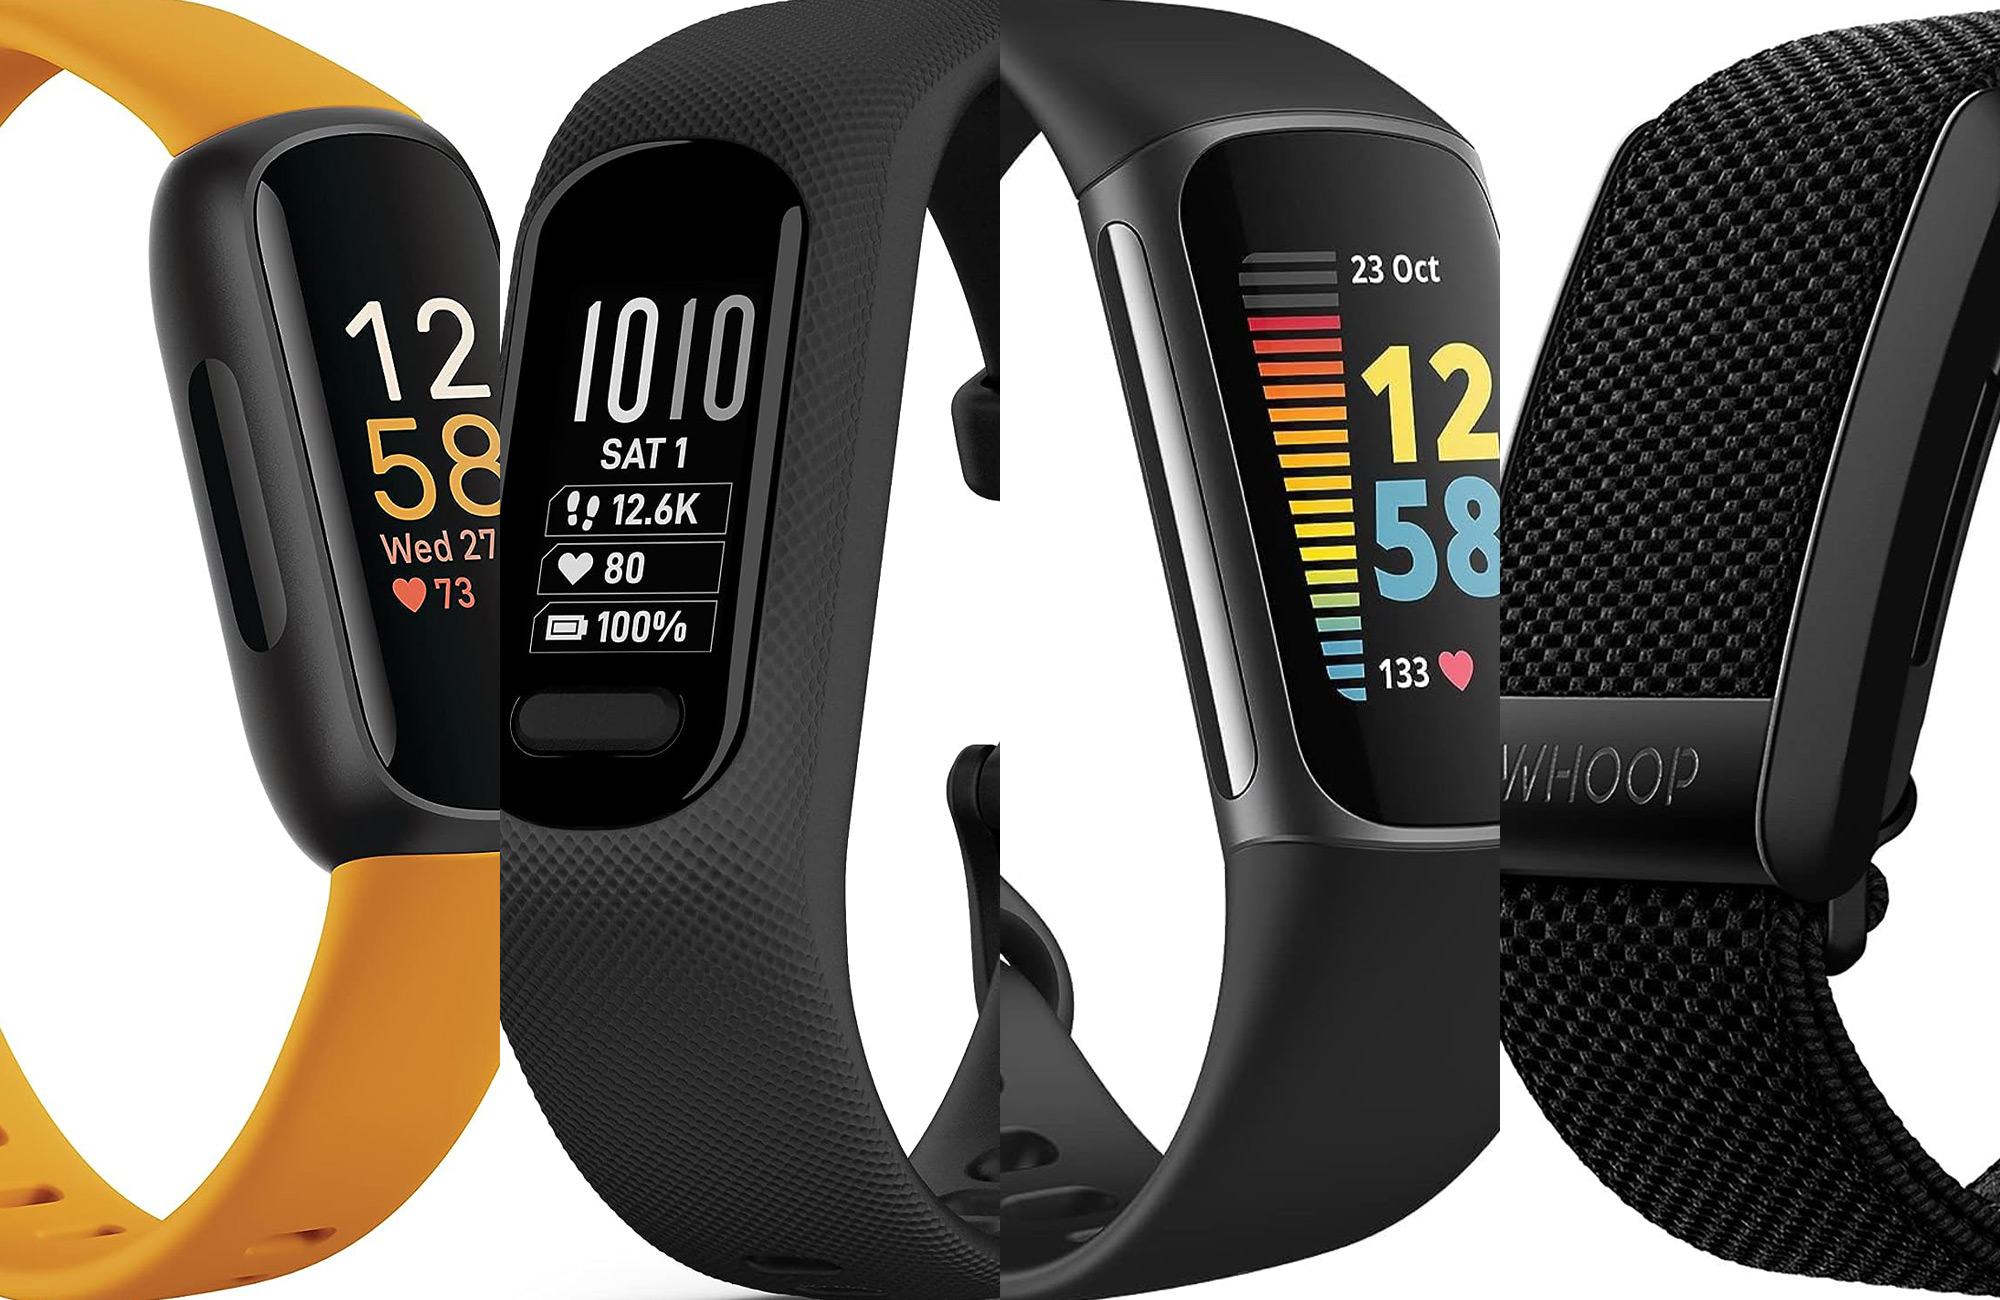 We review the wearable gadgets that can boost your health